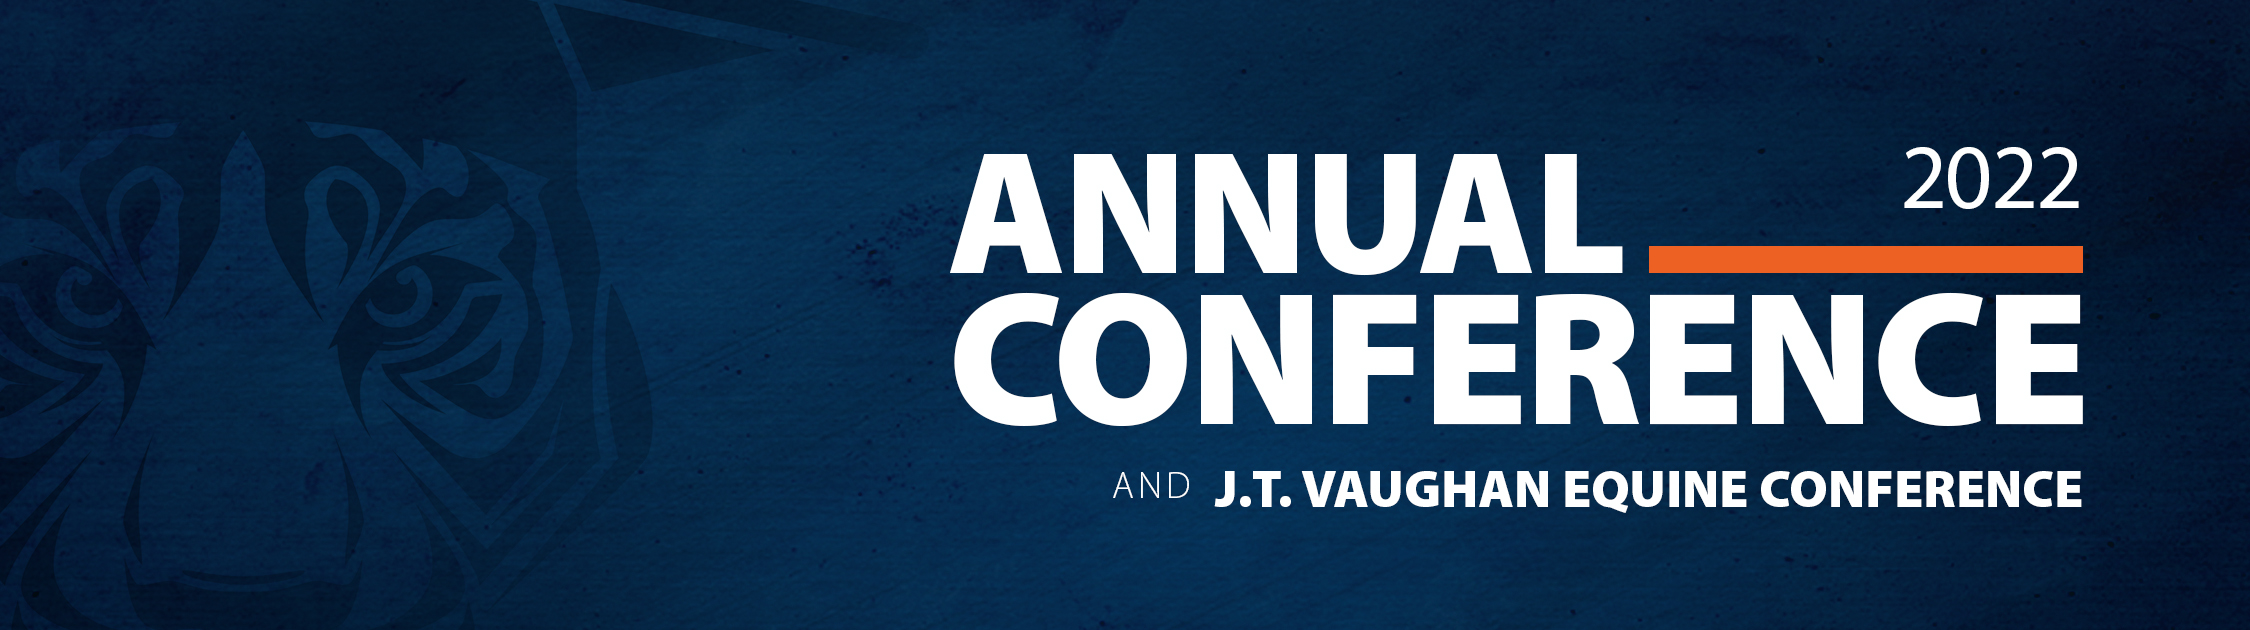 2022 Annual Conference and the J.T. Vaughn Equine Conference